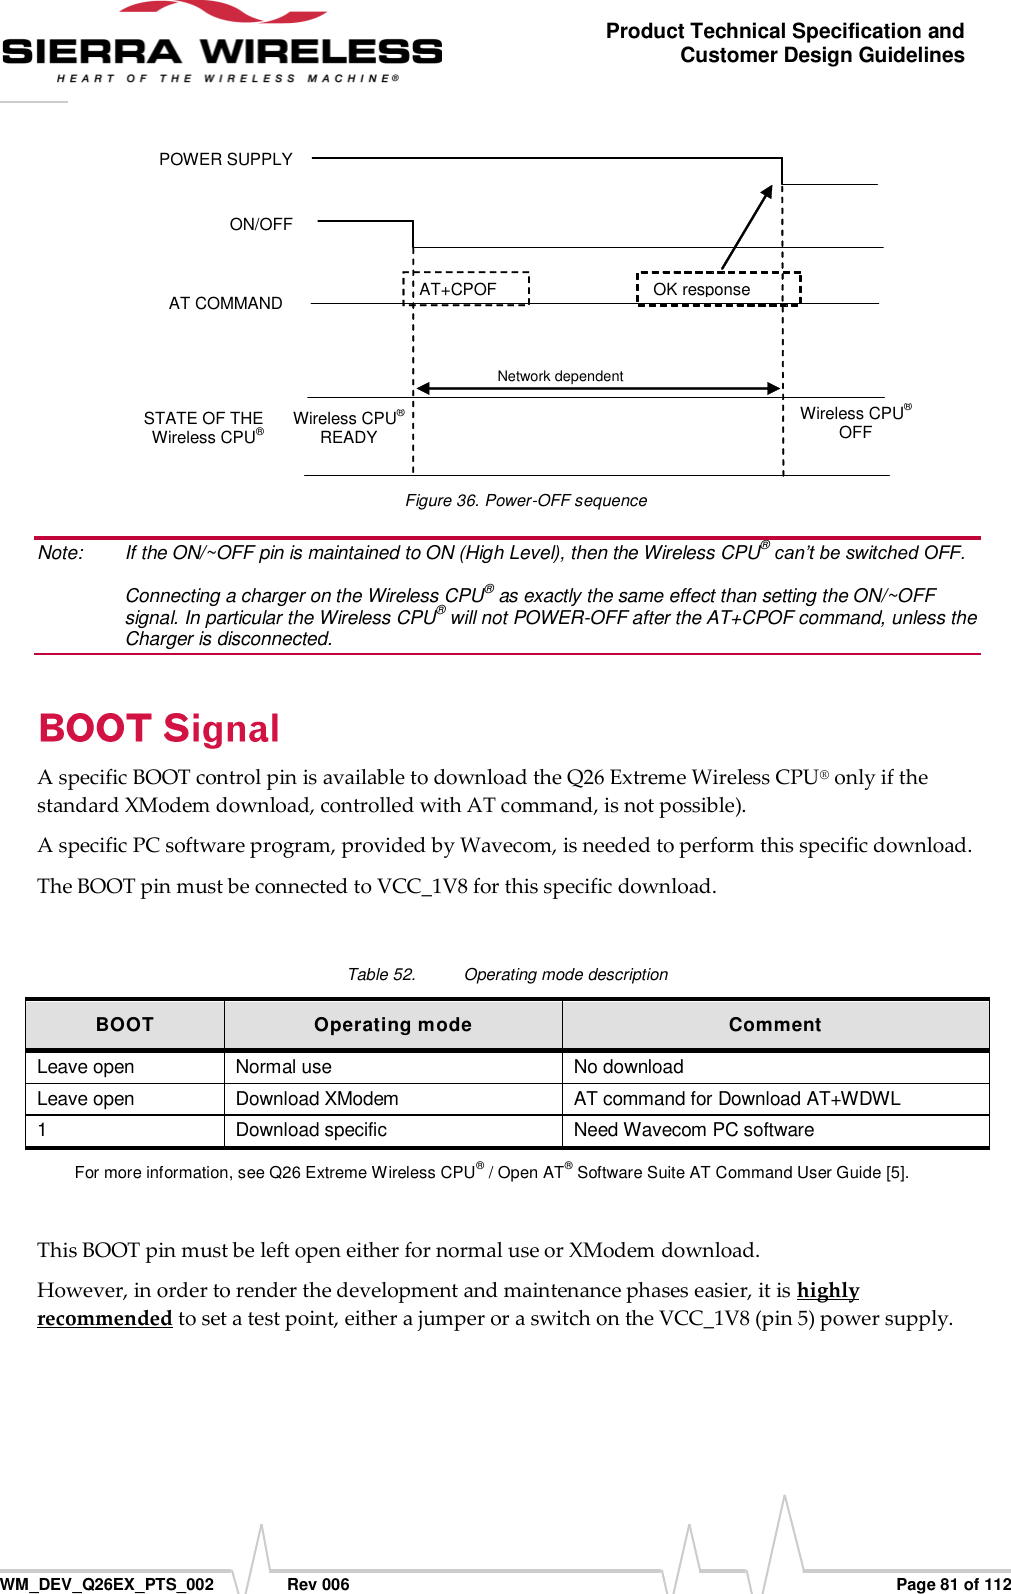      WM_DEV_Q26EX_PTS_002  Rev 006  Page 81 of 112 Product Technical Specification and Customer Design Guidelines  POWER SUPPLY ON/OFF AT COMMAND STATE OF THE Wireless CPU® AT+CPOF Wireless CPU® READY Wireless CPU® OFF IBB+RF&lt;22µA Network dependent OK response  Figure 36. Power-OFF sequence Note:   If the ON/~OFF pin is maintained to ON (High Level), then the Wireless CPU® can’t be switched OFF.  Connecting a charger on the Wireless CPU® as exactly the same effect than setting the ON/~OFF signal. In particular the Wireless CPU® will not POWER-OFF after the AT+CPOF command, unless the Charger is disconnected. A specific BOOT control pin is available to download the Q26 Extreme Wireless CPU® only if the standard XModem download, controlled with AT command, is not possible). A specific PC software program, provided by Wavecom, is needed to perform this specific download. The BOOT pin must be connected to VCC_1V8 for this specific download.  Table 52.  Operating mode description BOOT Operating mode Comment Leave open Normal use No download Leave open Download XModem AT command for Download AT+WDWL 1 Download specific Need Wavecom PC software For more information, see Q26 Extreme Wireless CPU® / Open AT® Software Suite AT Command User Guide [5].  This BOOT pin must be left open either for normal use or XModem download. However, in order to render the development and maintenance phases easier, it is highly recommended to set a test point, either a jumper or a switch on the VCC_1V8 (pin 5) power supply.  